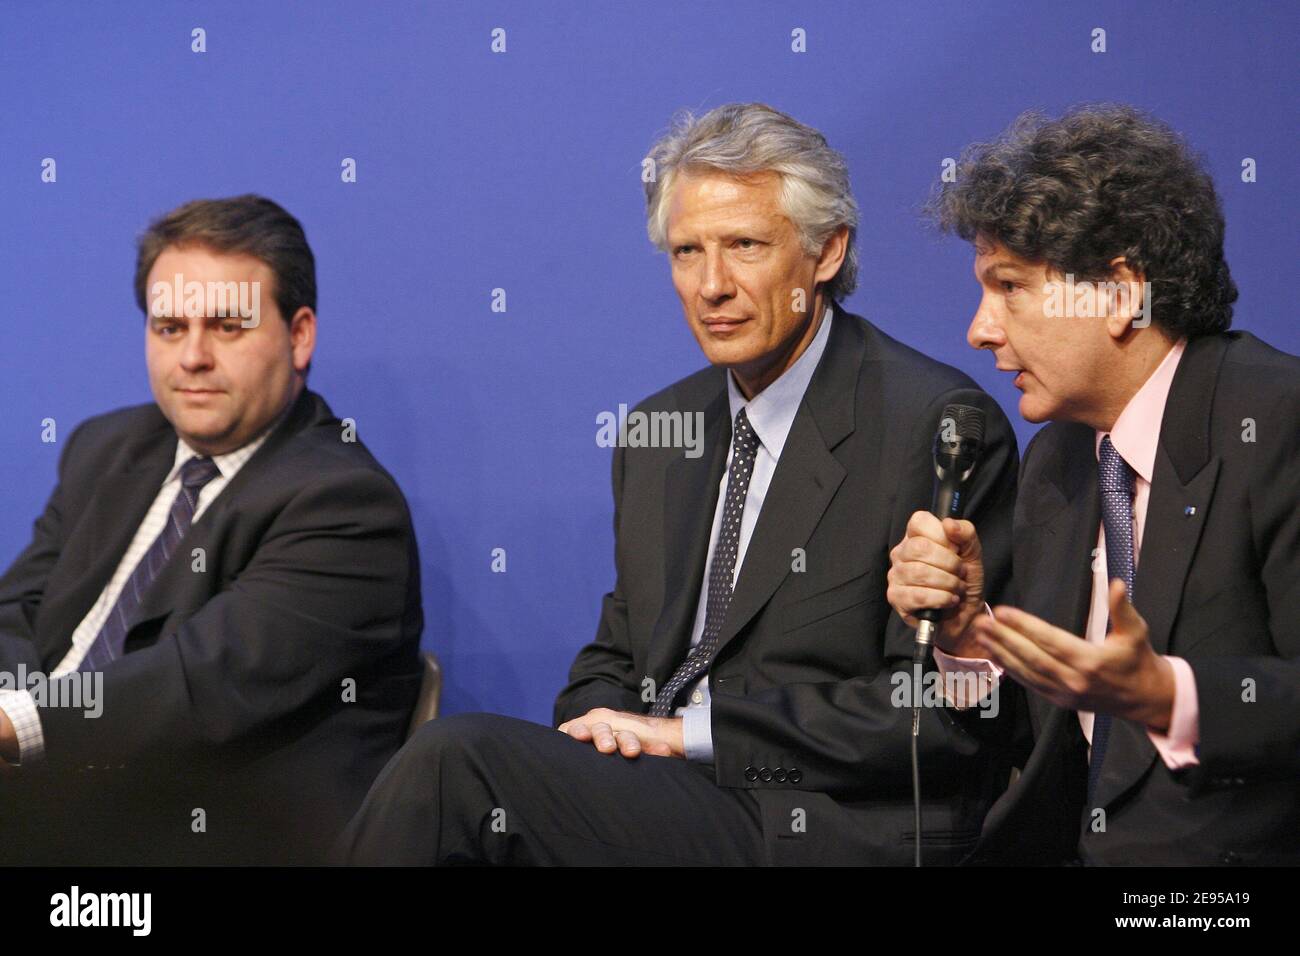 (L to R) Xavier Bertrand, Minister for the Health and Solidarity, Prime Minister Dominique de Villepin with Thierry Breton, Minister for the Economy, Finance and Industry present plans to reduce the country's massive debt during a meeting on public finances in Paris, France, on January 12, 2006. Photo by Mehdi Taamallah/ABACAPRESS.COM Stock Photo